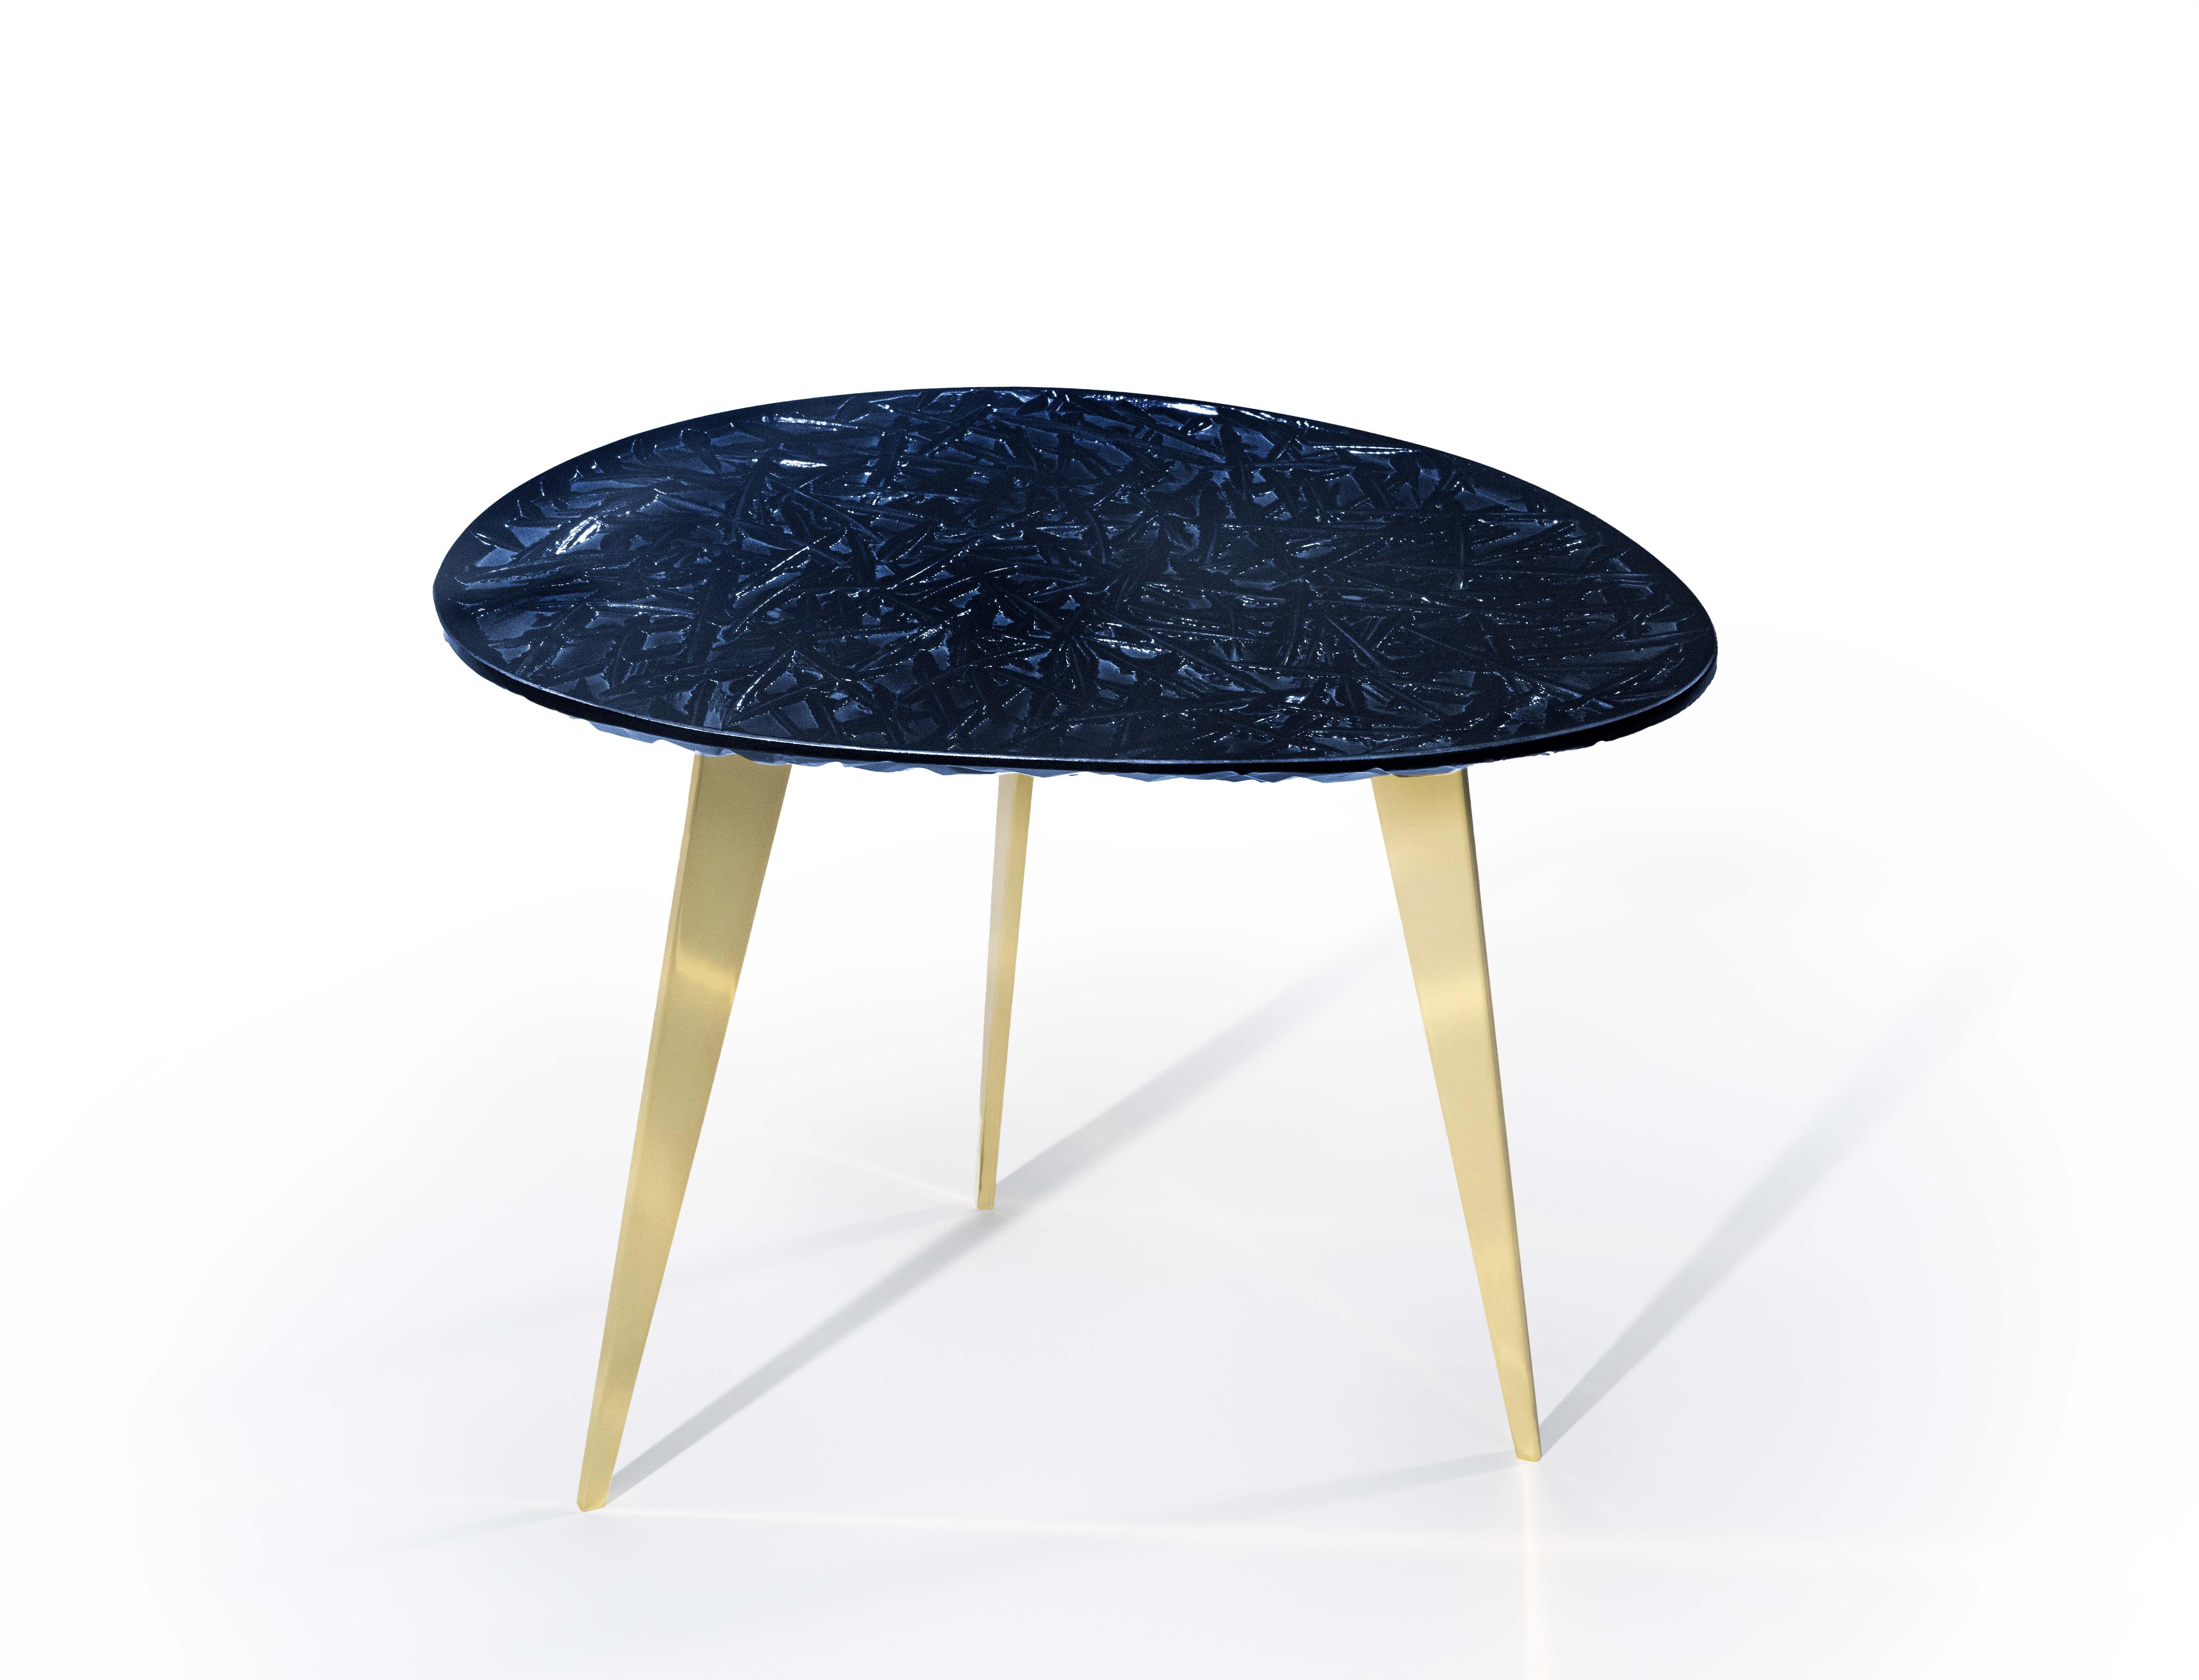 
Designed to embellish and to give authentic beauty to the environment. The entire support structure is made of brass. The under plate has a matt black finish while the three legs have a polished brass finish. The crystal top has the shape of a